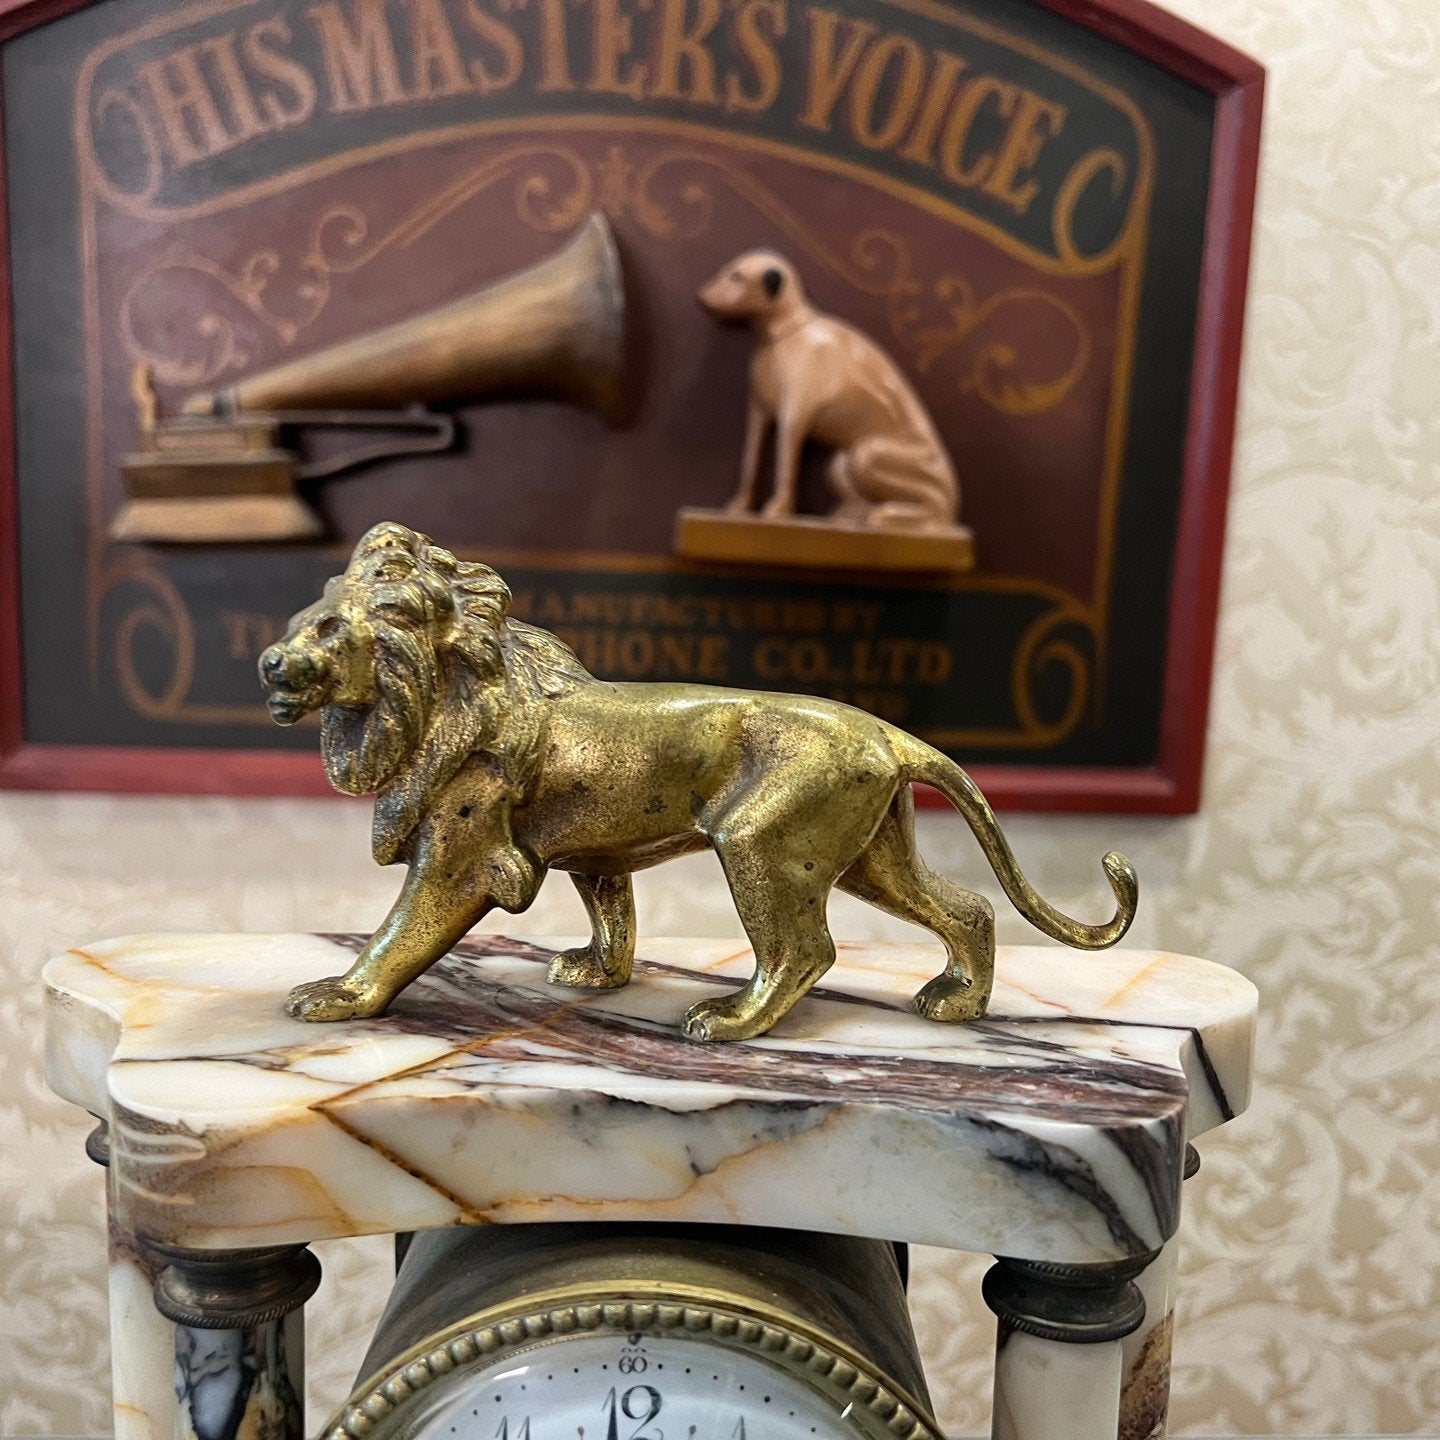 Antique French mantel clock with marble base and brass lion figurine, His Master's Voice sign in background